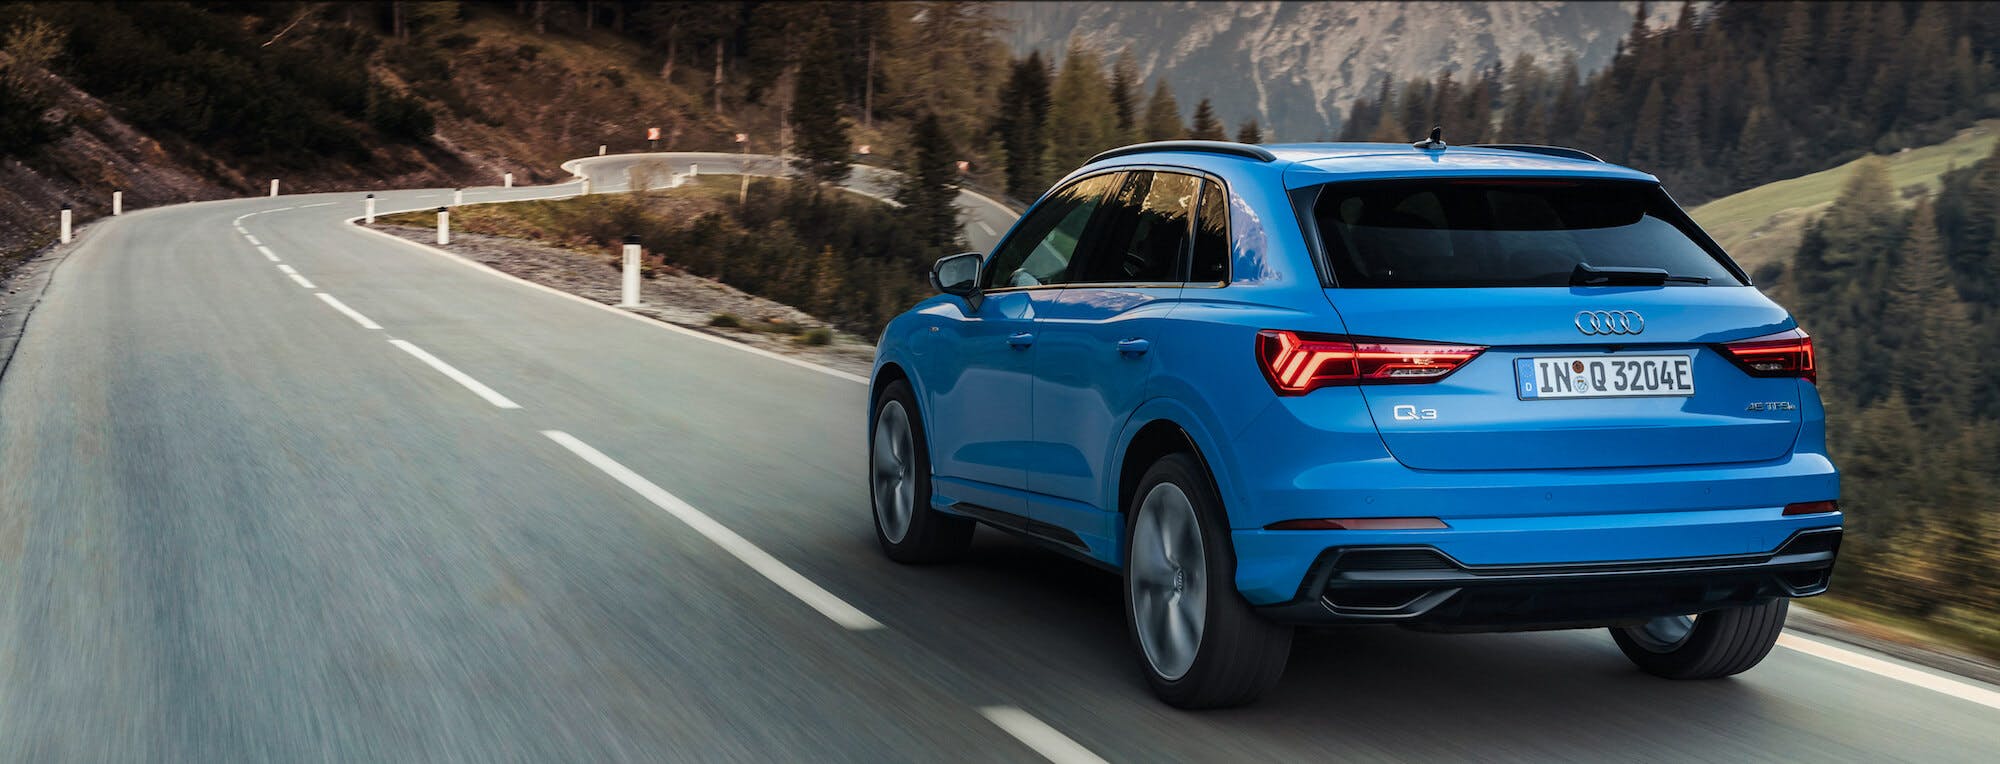 Audi Q3 rental | Long and short term | Virtuo | Virtuo